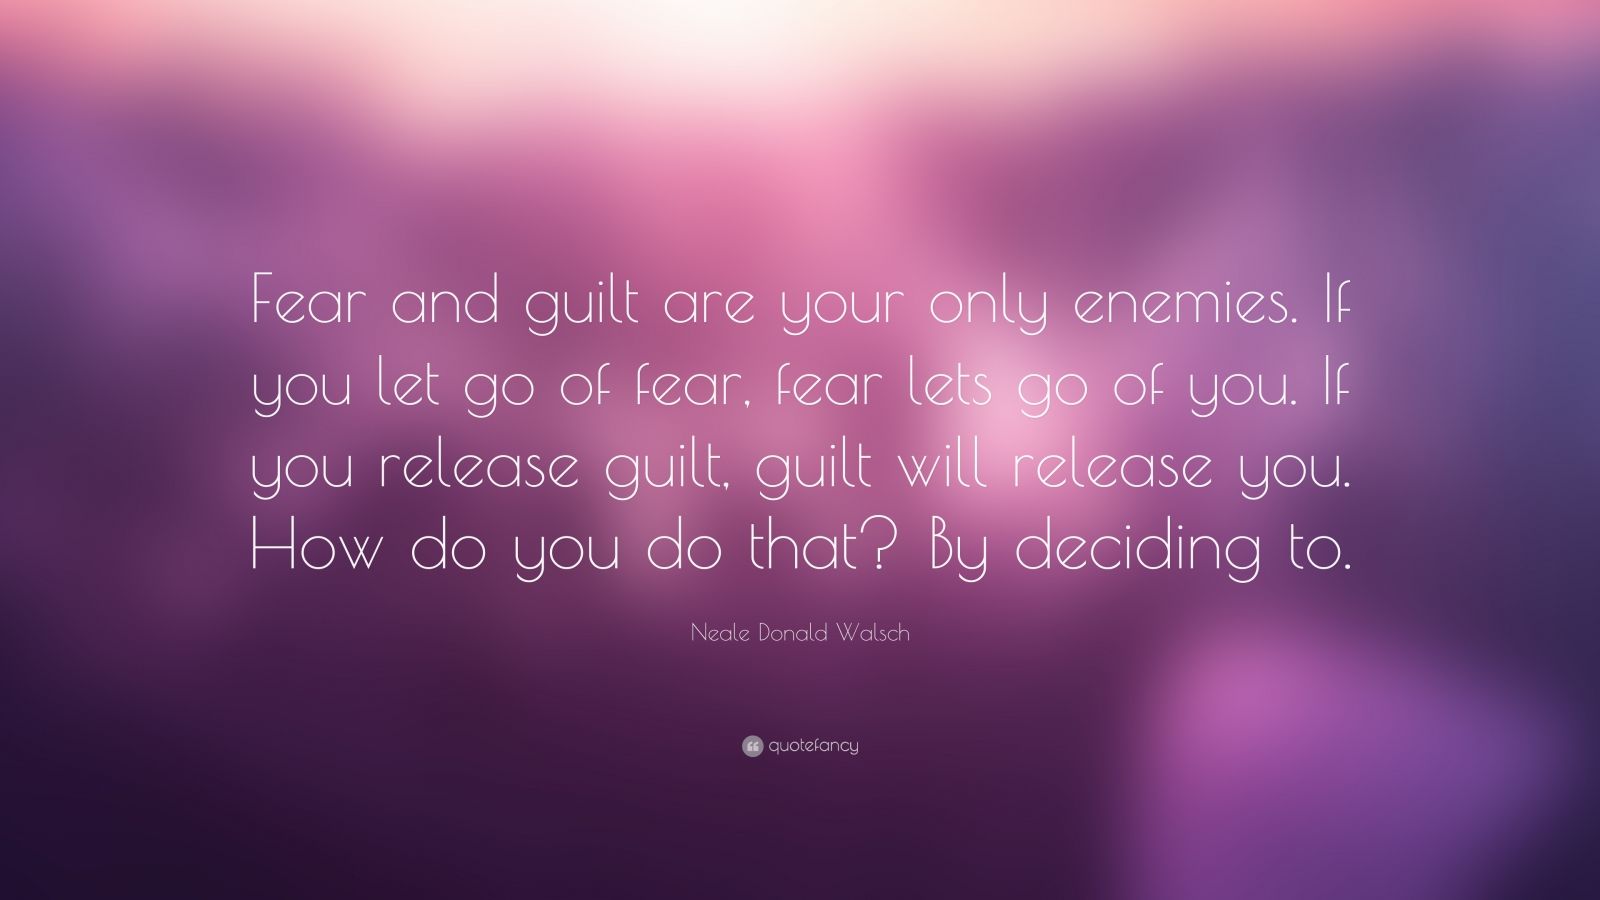 Neale Donald Walsch Quote: “Fear and guilt are your only enemies. If ...